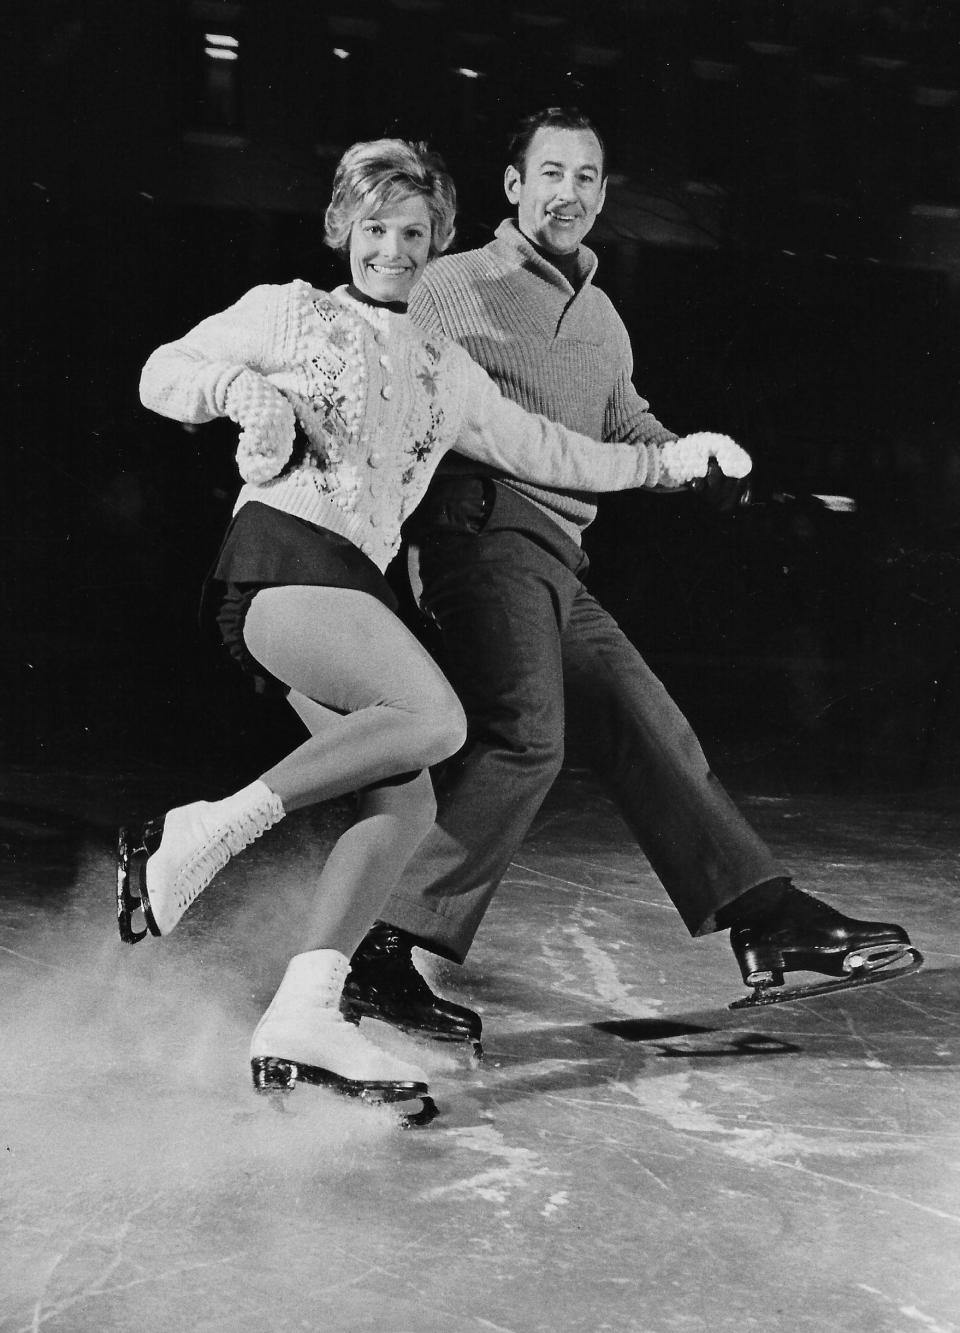 Carol Heiss Jenkins and her husband, Hayes Alan Jenkins, both Olympic champions, skate in Akron in the 1970s.